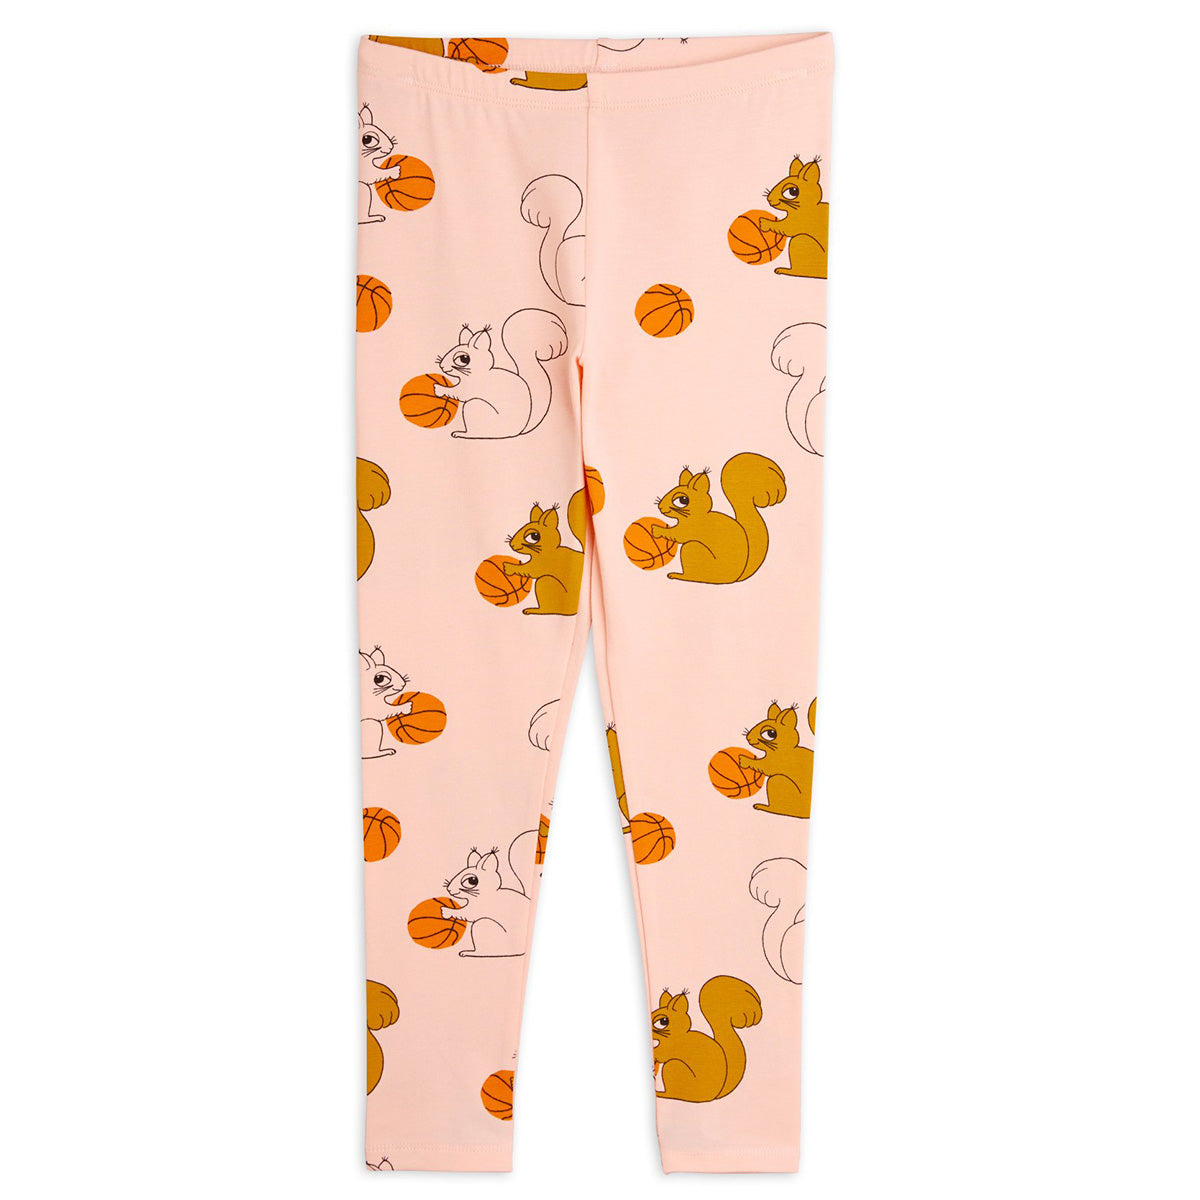 The Squirrels Leggings from Mini Rodini. Leggings with elastic waist and slight stretch. Squirrels print.